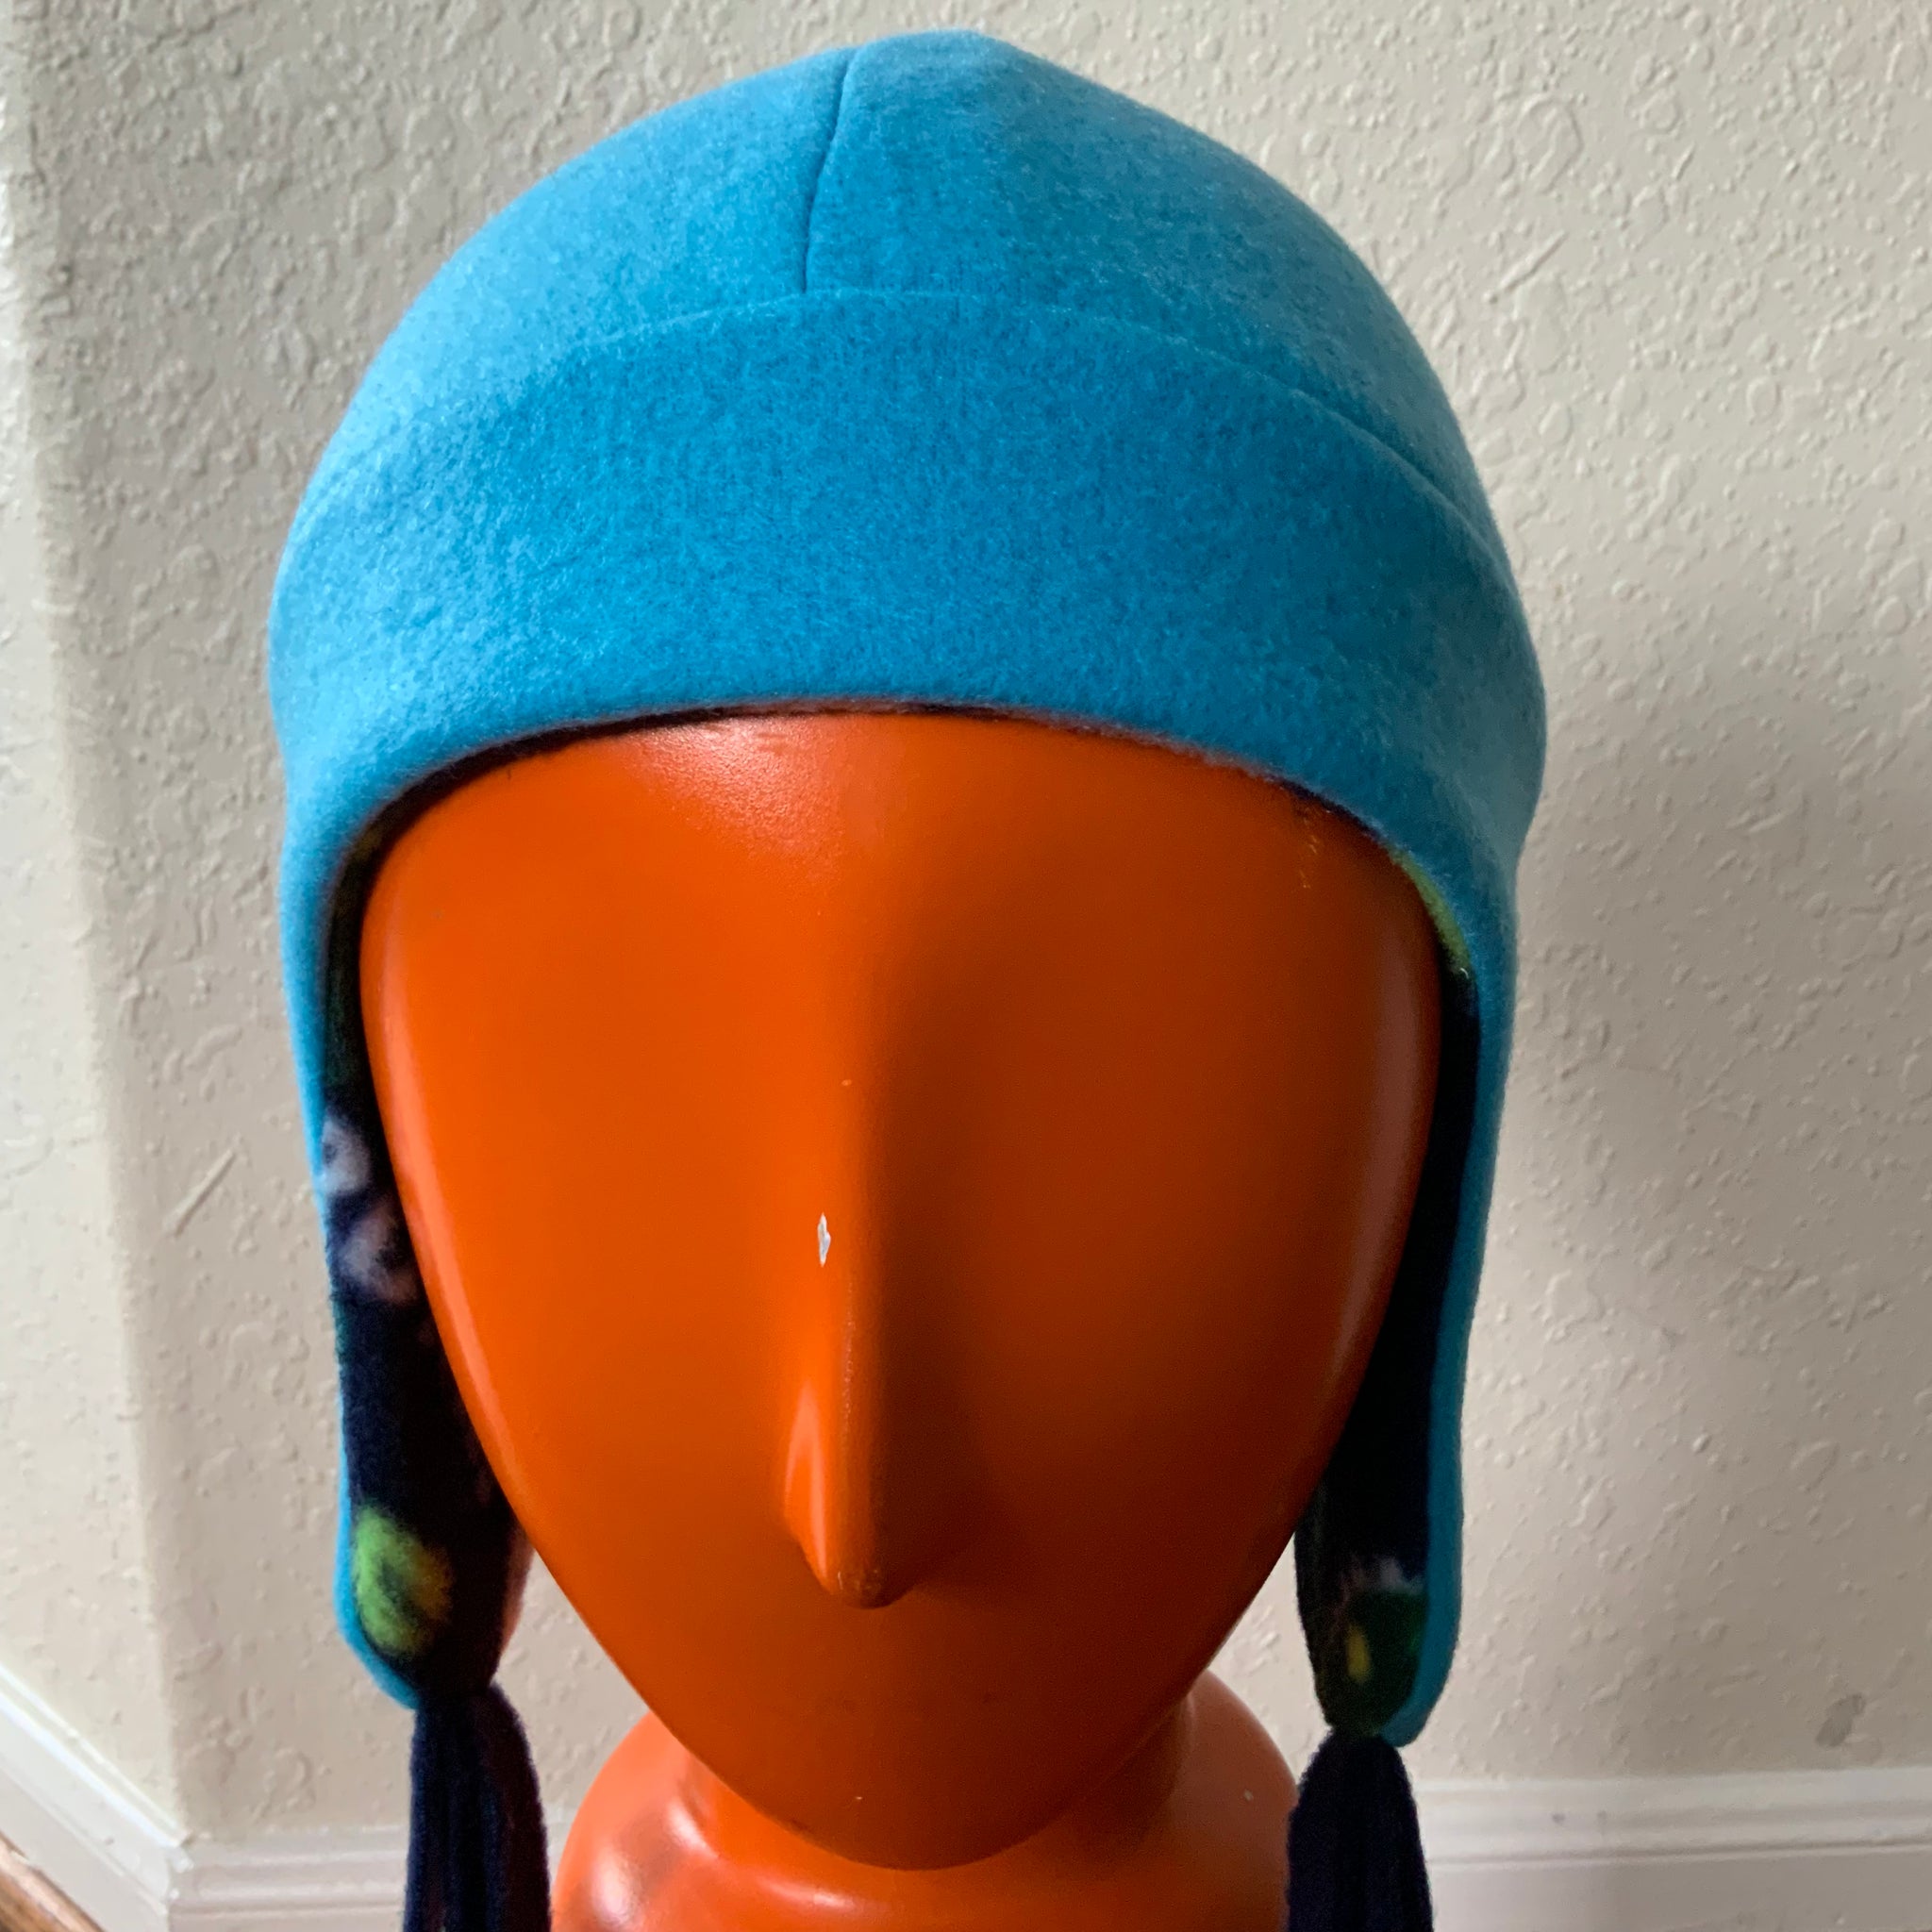 Reversible Dino Kids Fleece Beanie Hat with Earflaps and Ties